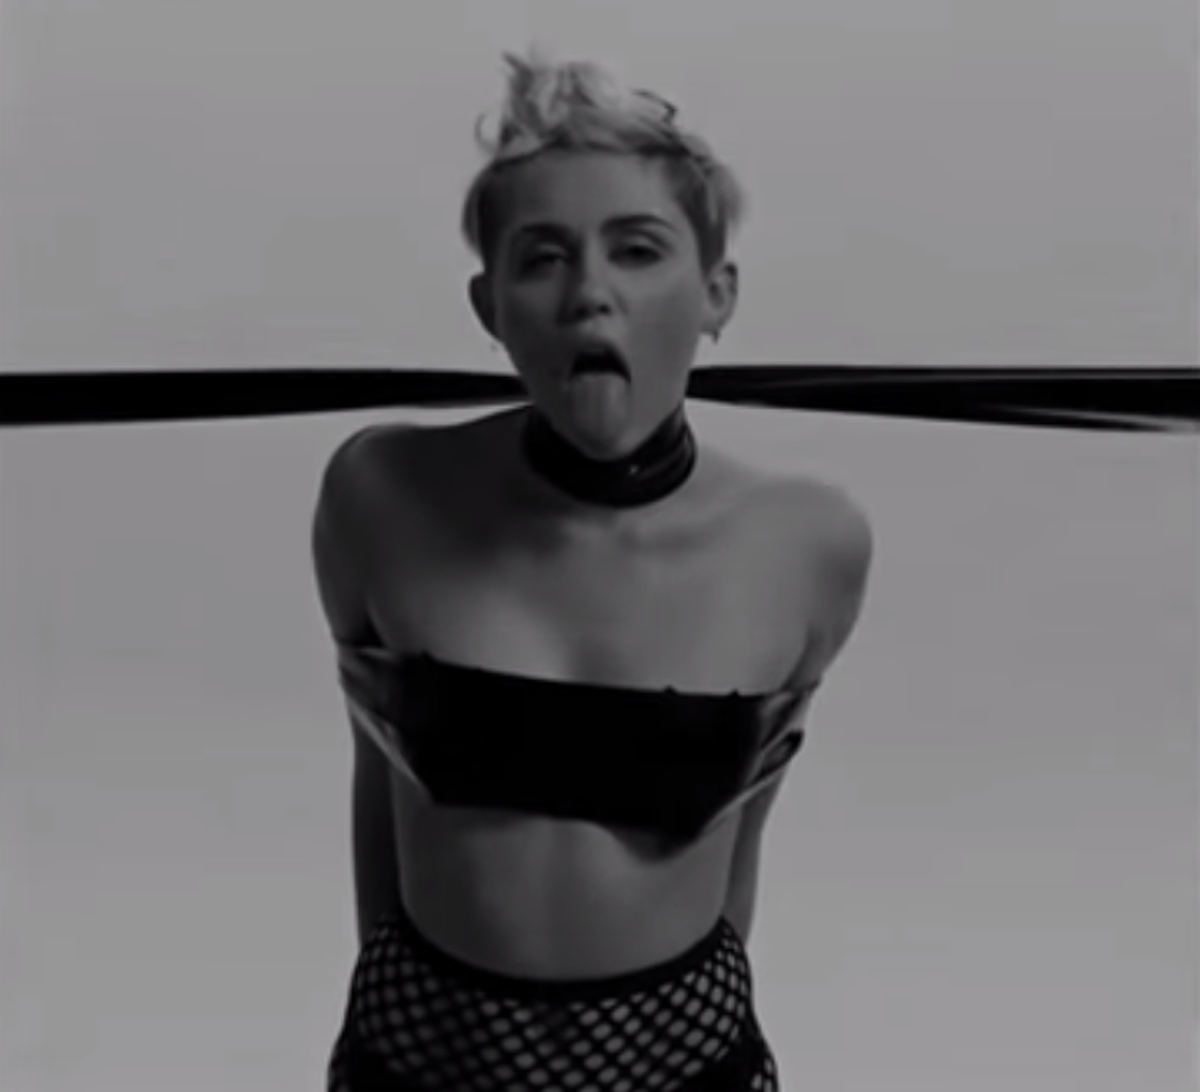 Radar reccomend Miley cyrus get tied up naked